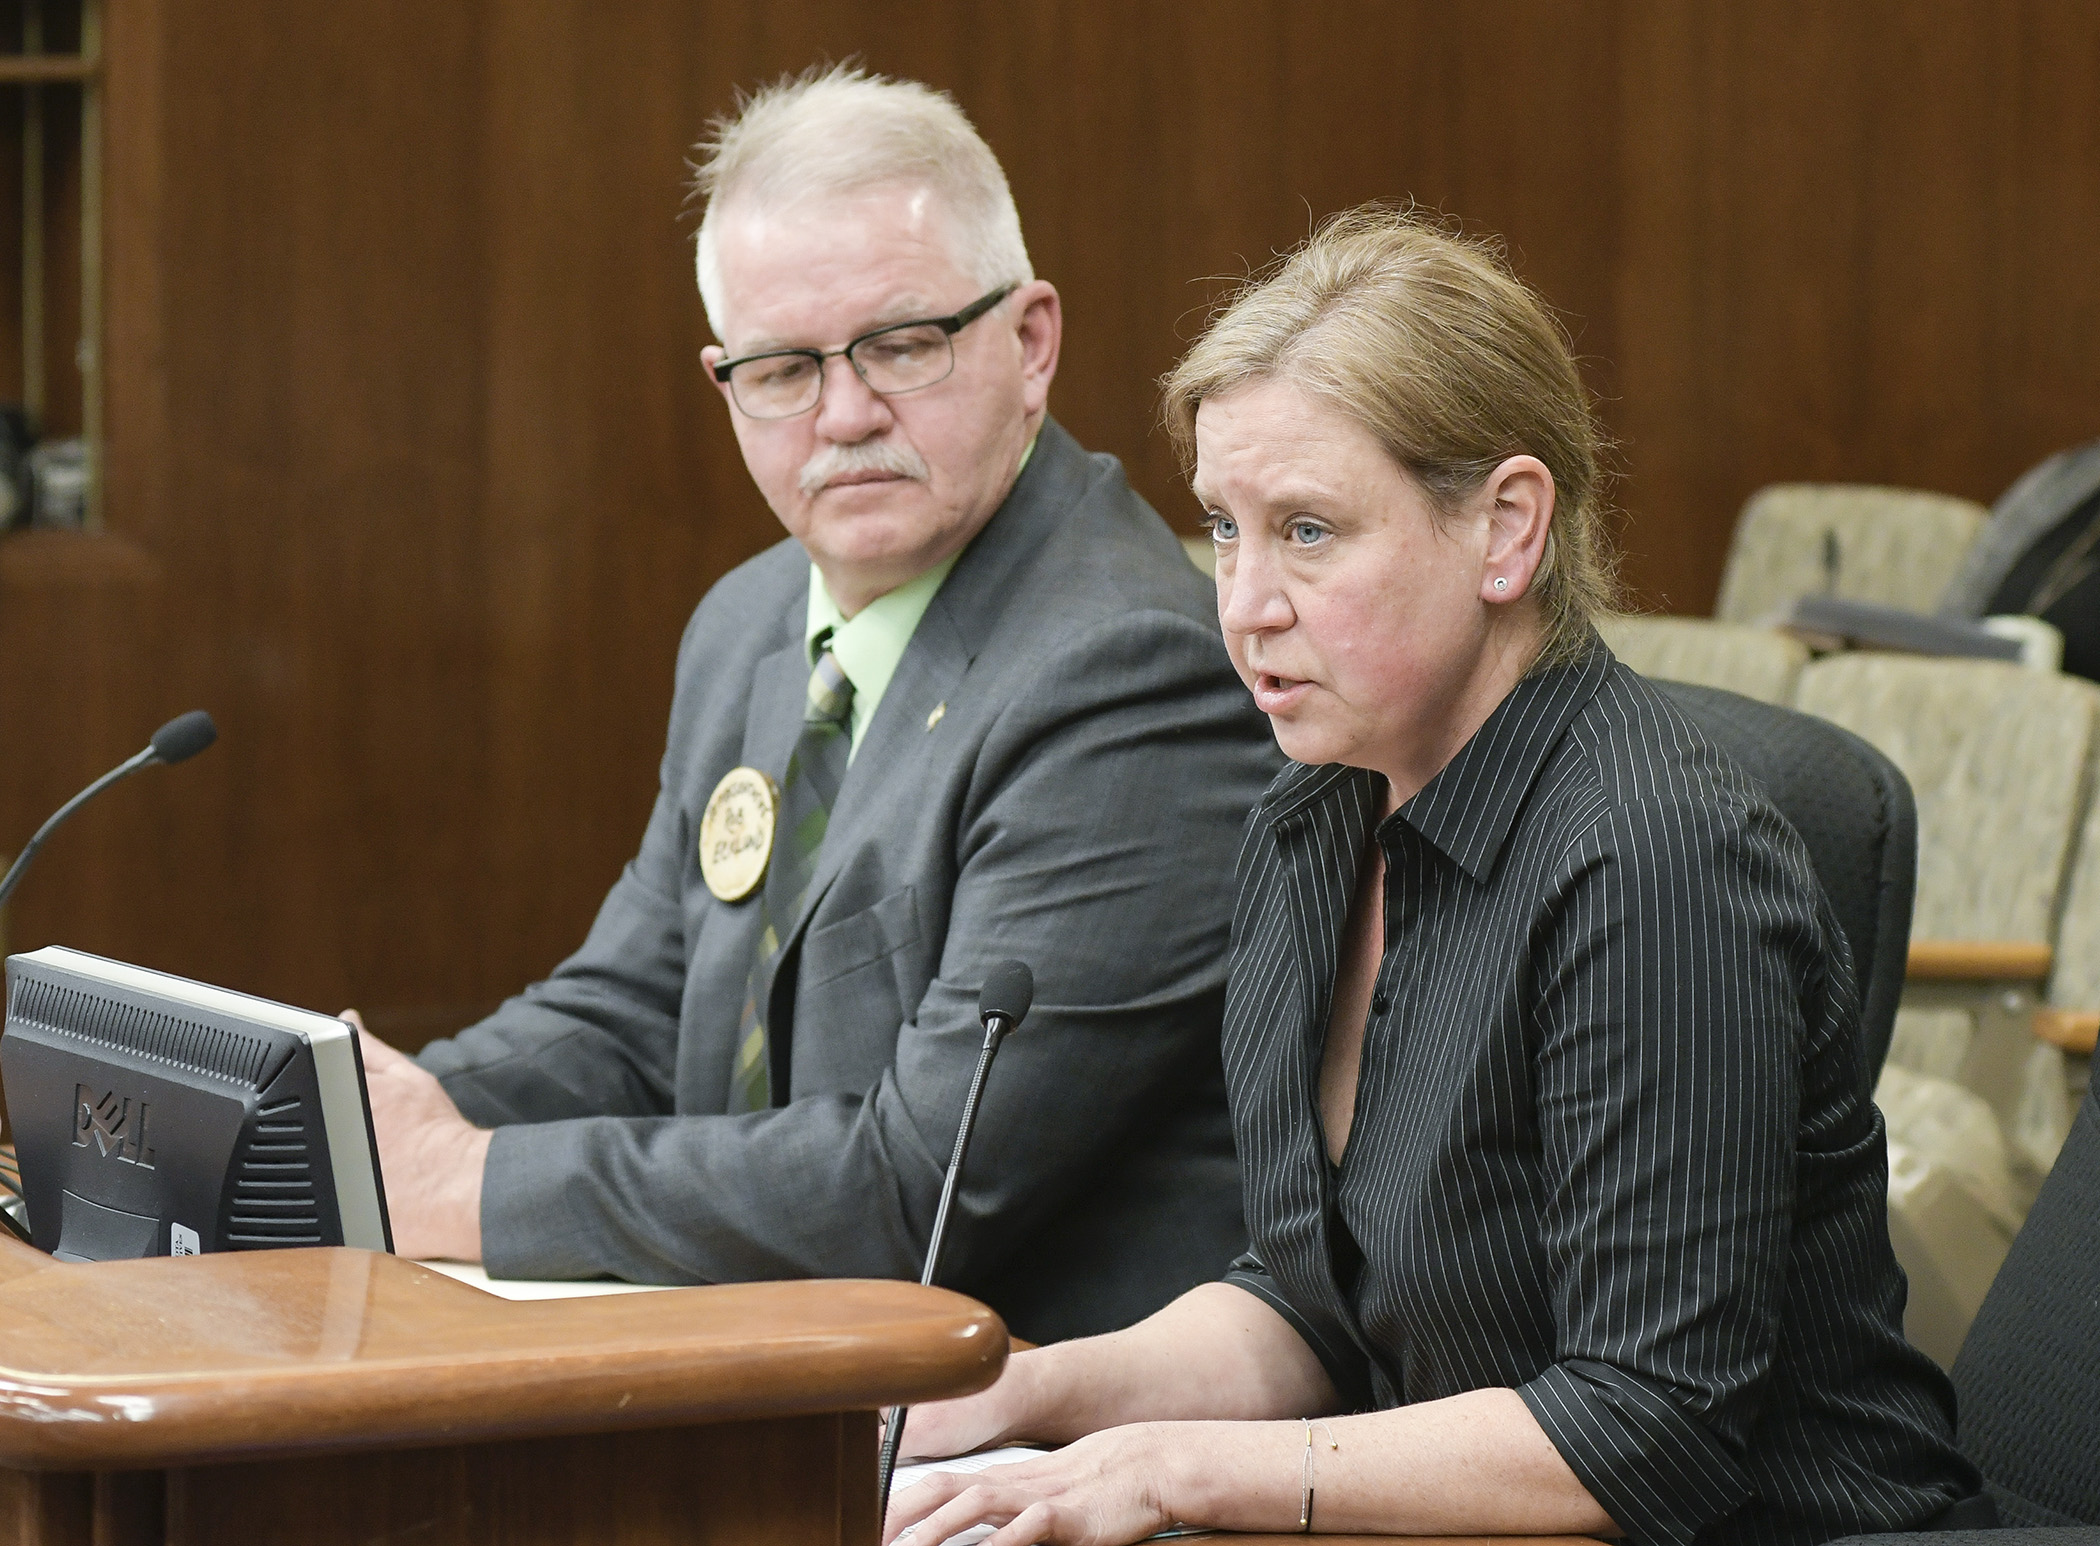 Karen Blackburn, executive director for Cook County Higher Education, testifies March 14 in support of a bill sponsored by Rep. Rob Ecklund, left, that would provide educational programming and academic support funding for northeastern Minnesota. Photo by Andrew VonBank